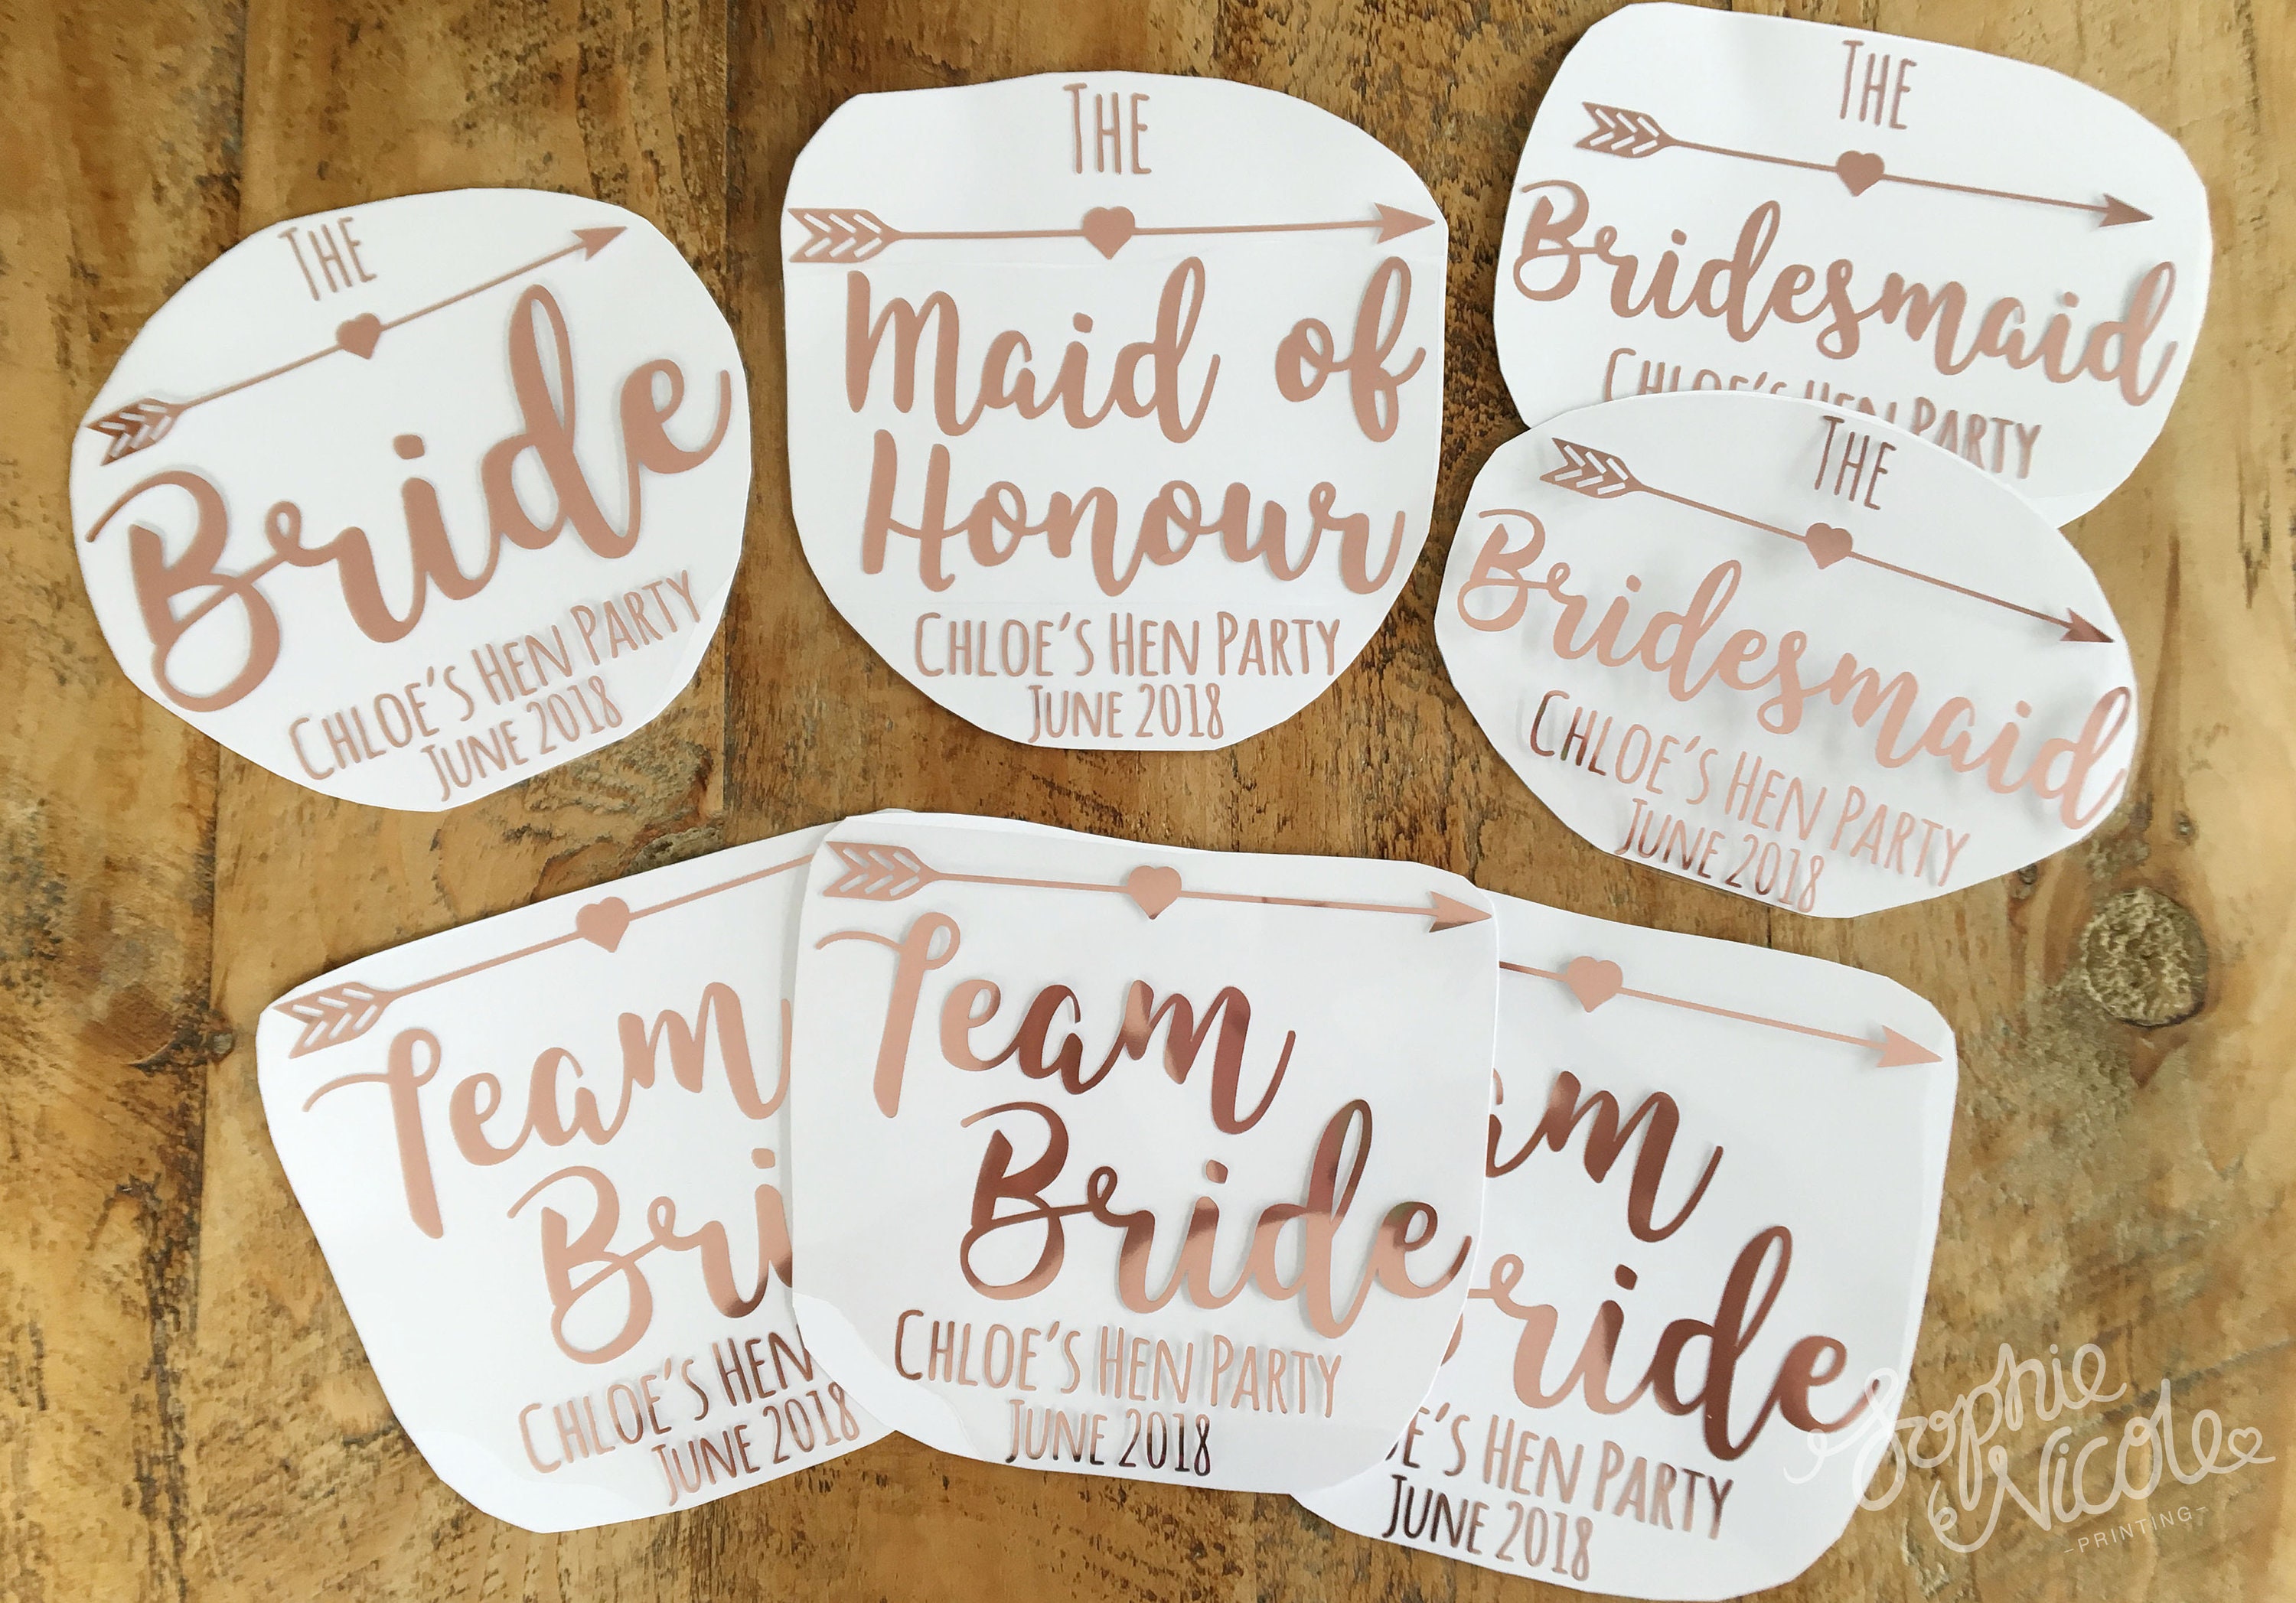 htv party wear iron on decals personalised Party Hen party bridal party